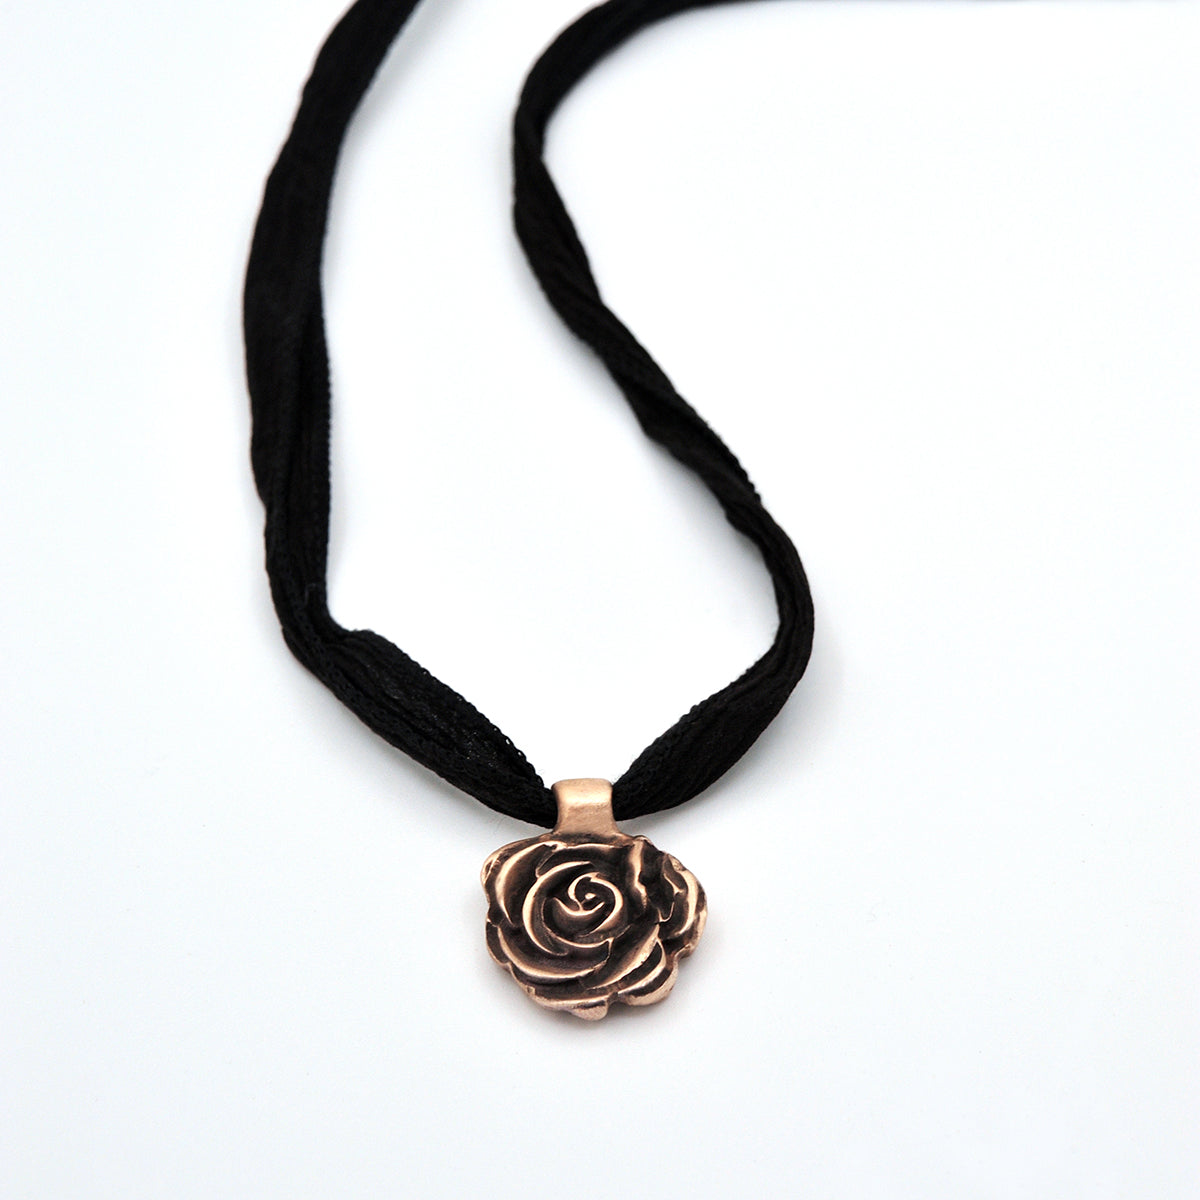 Handcrafted Bronze Rose Pendant Necklace on Silk Cording